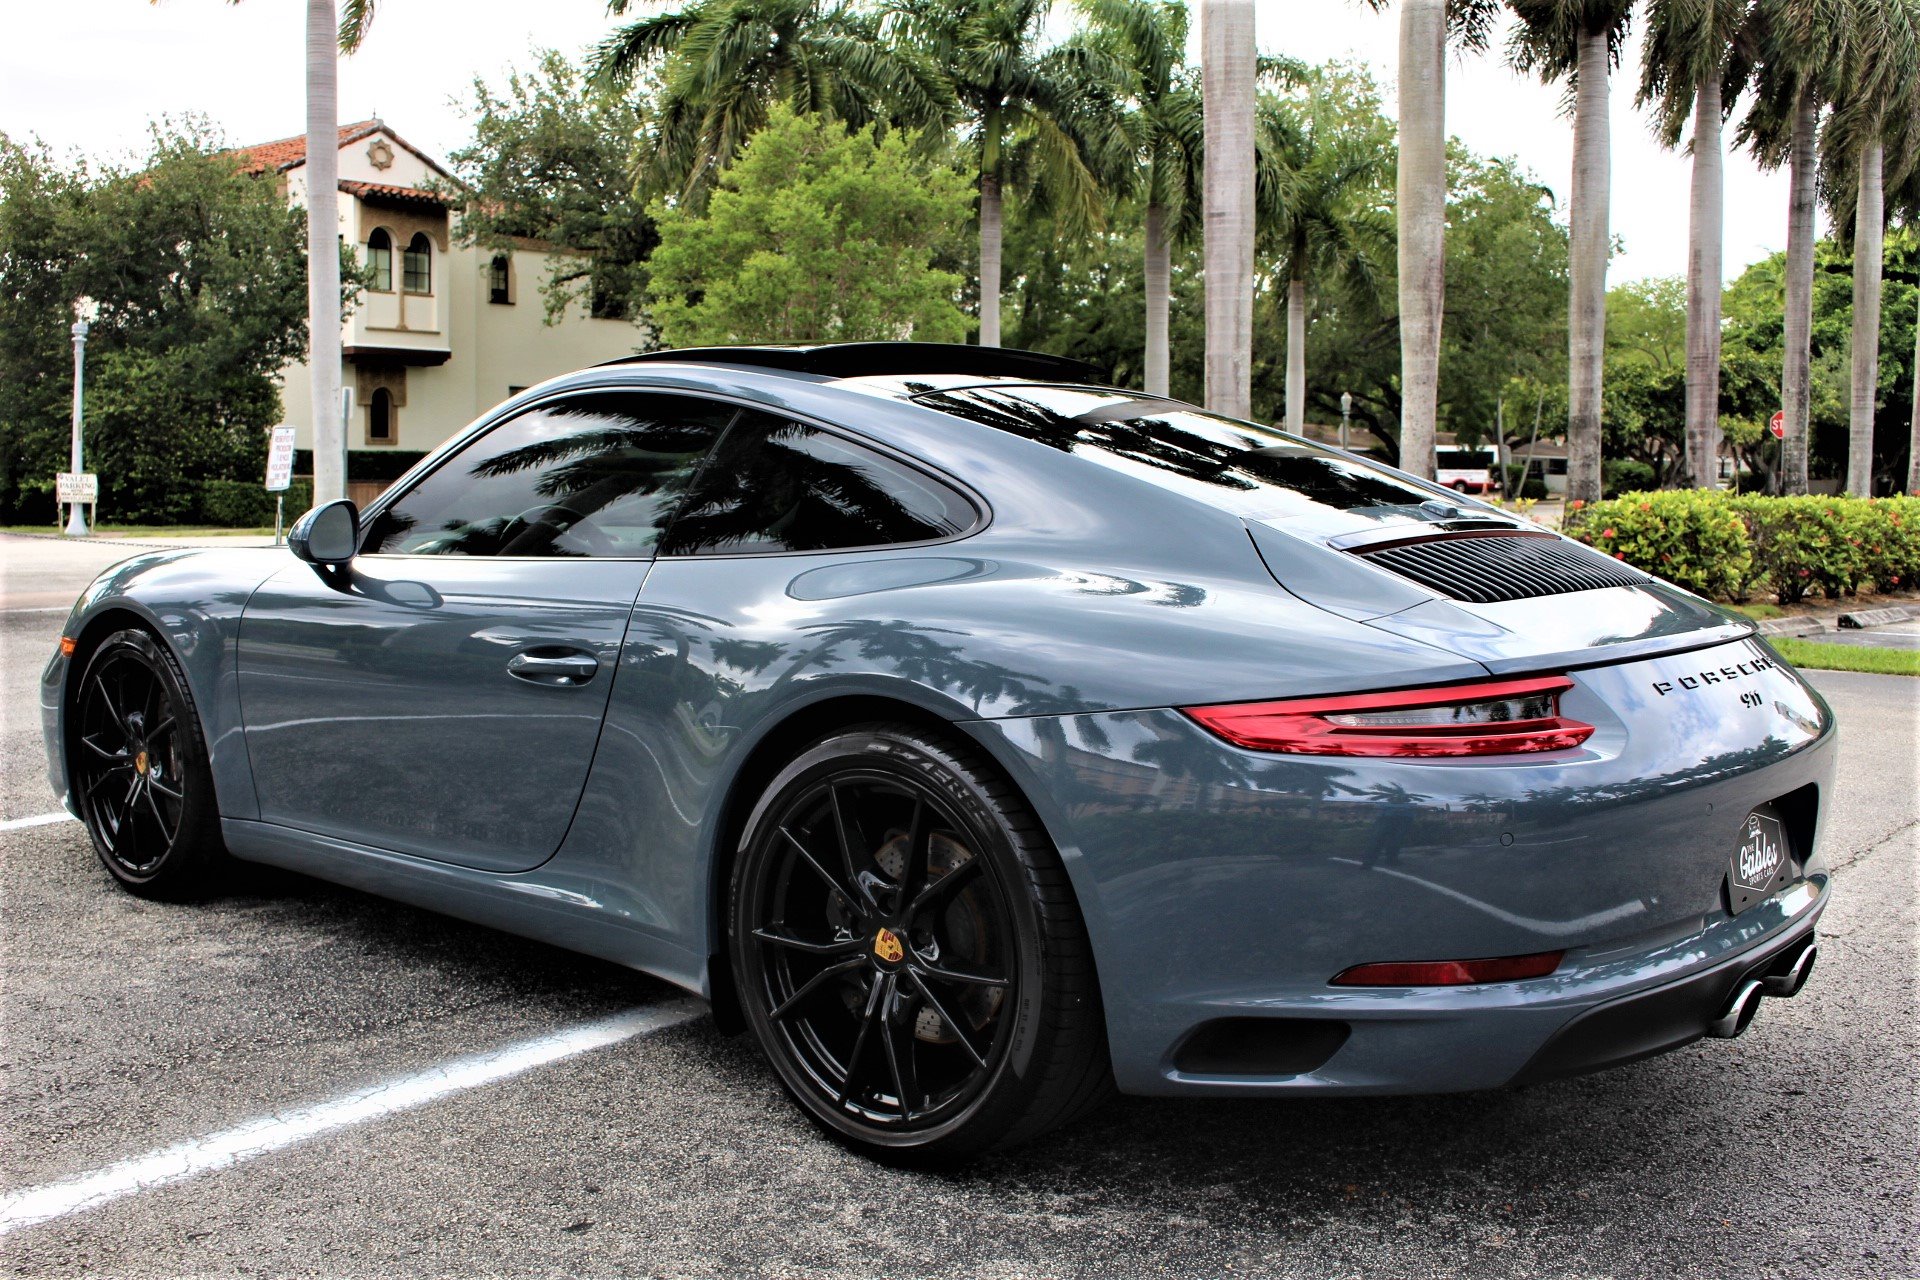 Used 2017 Porsche 911 Carrera for sale Sold at The Gables Sports Cars in Miami FL 33146 1